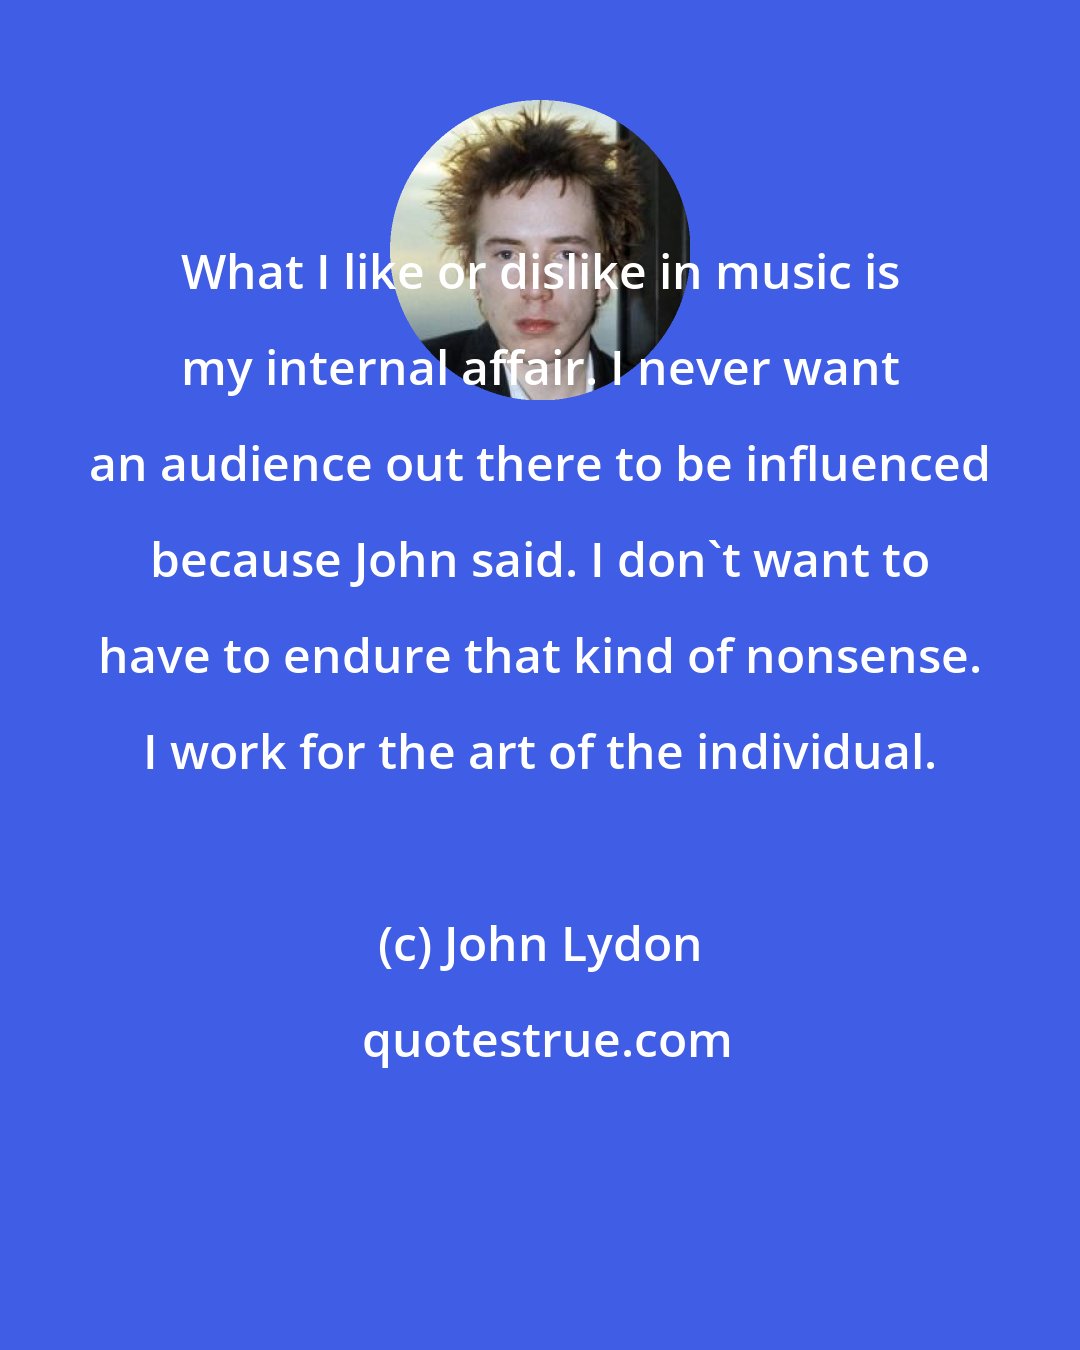 John Lydon: What I like or dislike in music is my internal affair. I never want an audience out there to be influenced because John said. I don't want to have to endure that kind of nonsense. I work for the art of the individual.